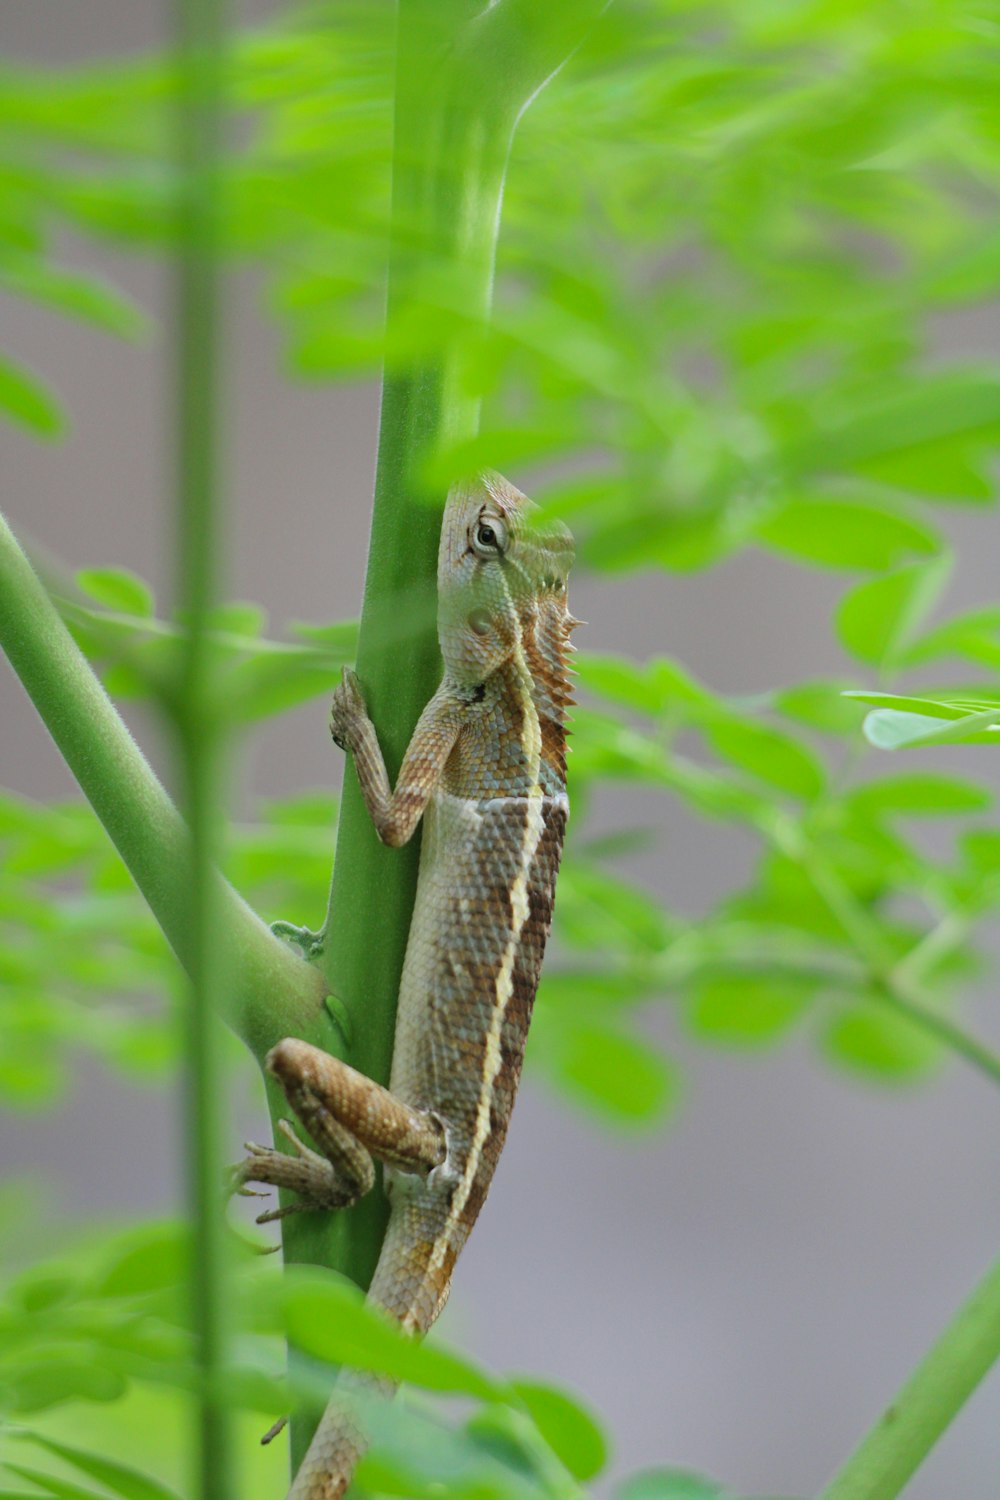 a lizard sitting on top of a green plant